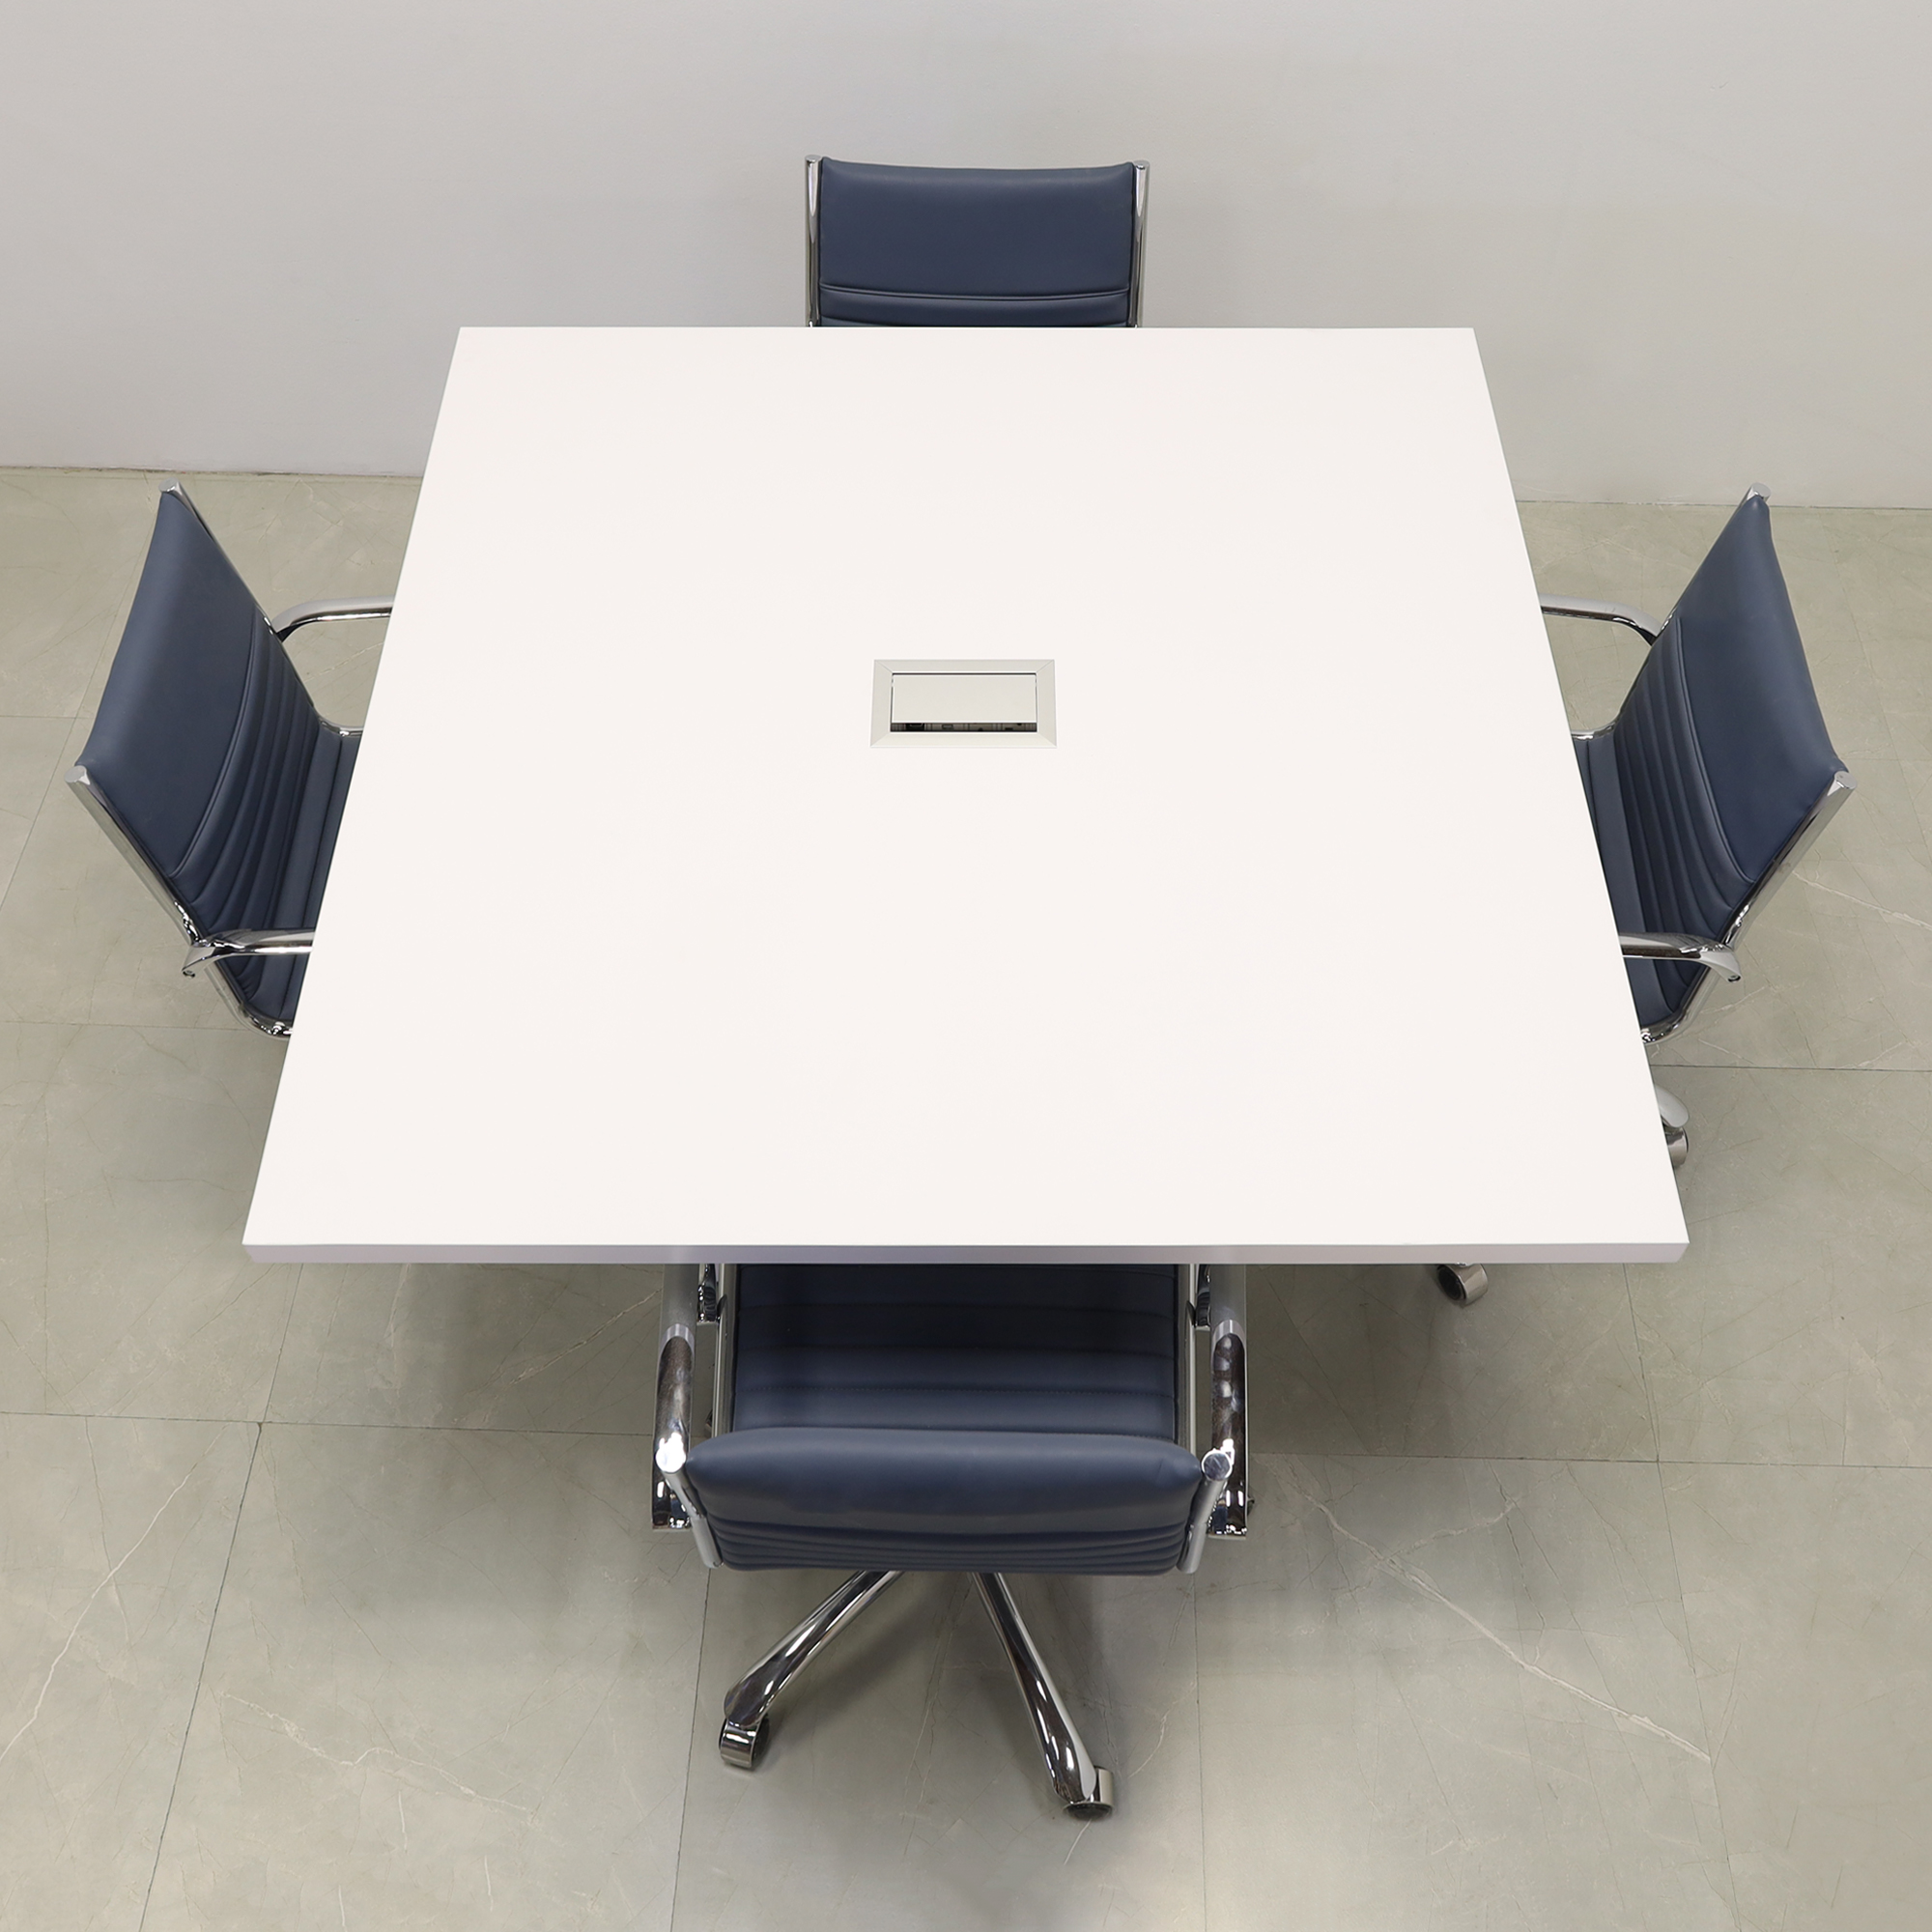 54-inch Newton Square Conference Table With Laminate Top in white matte laminate top and base, with silver MX3 powerbox, shown here.